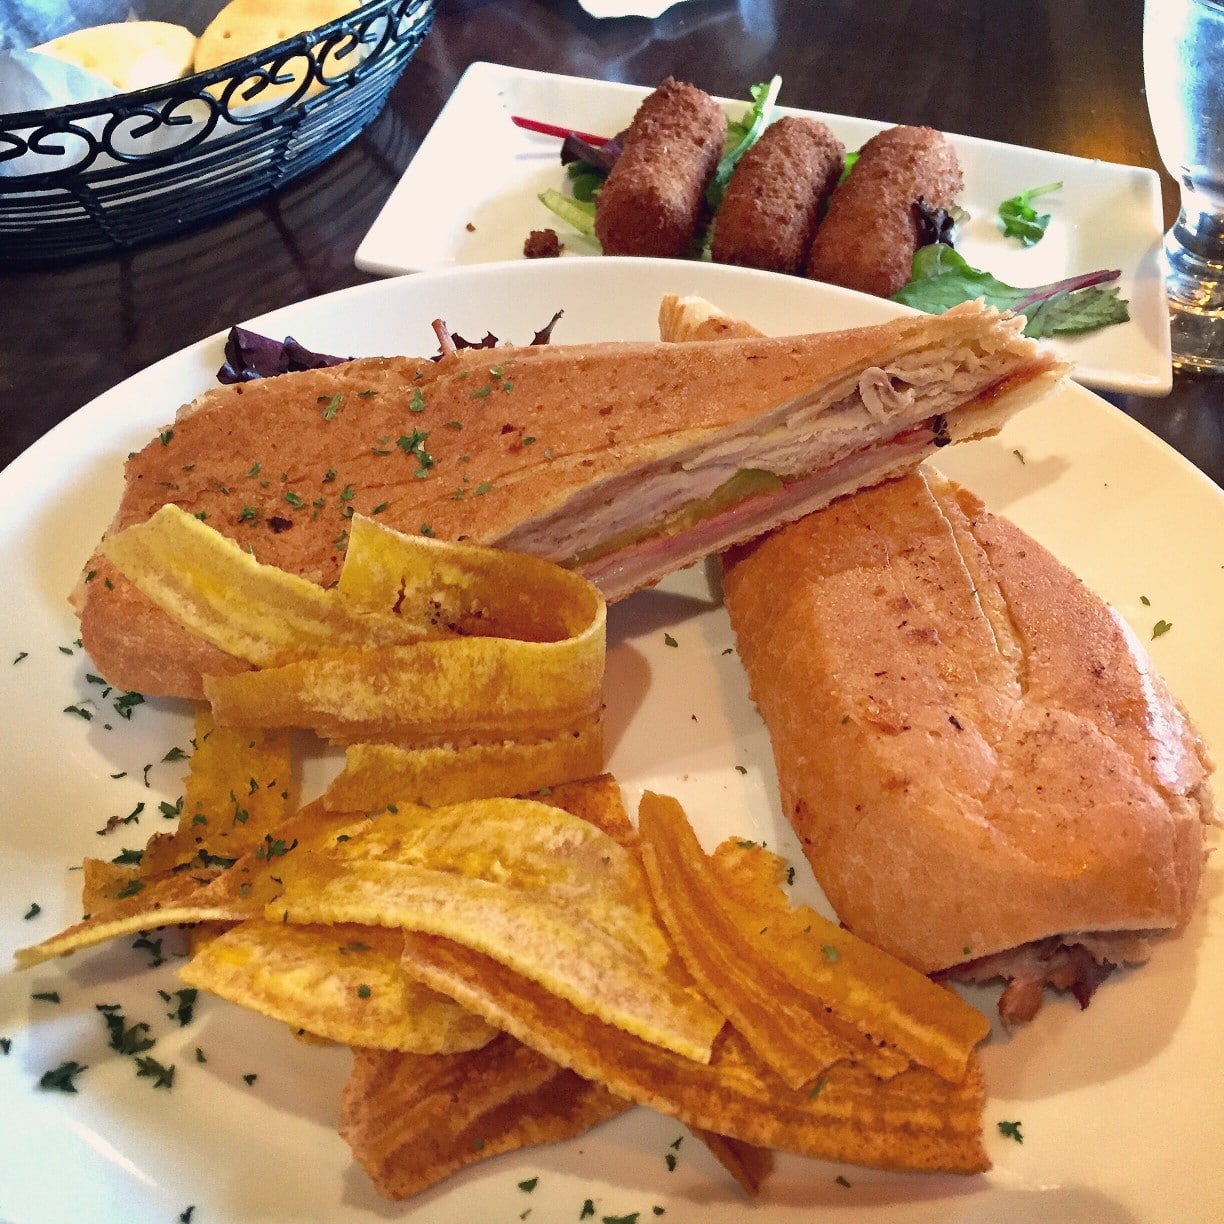 What To Serve With Cuban Sandwiches: Sides & Compliments